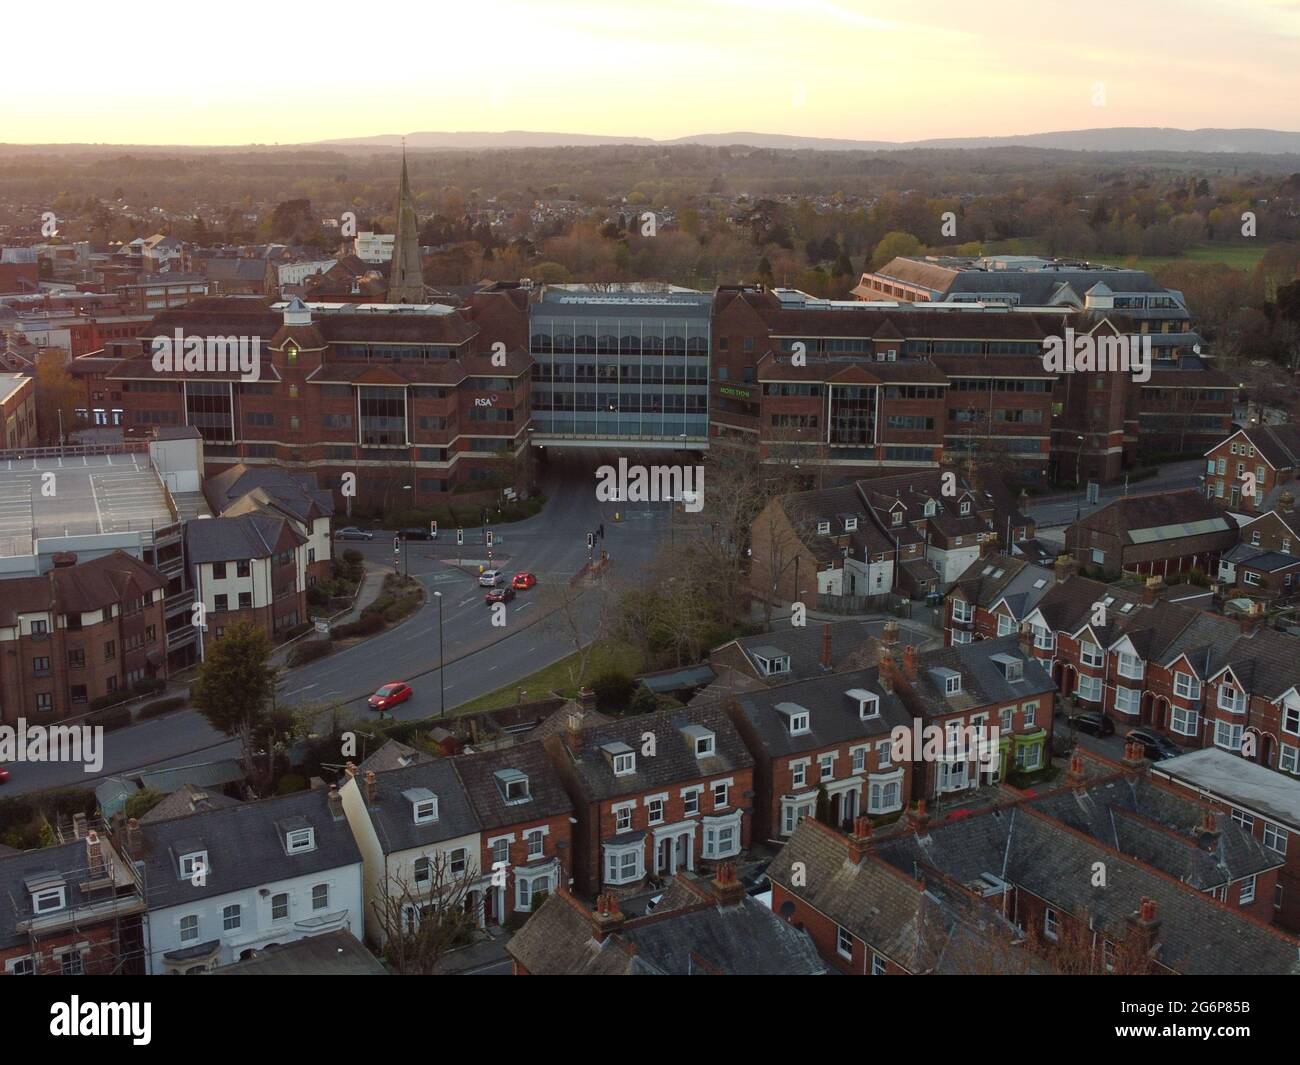 Aerial View of Horsham Town Center, with the Royal Sun Alliance Building in view. Stock Photo